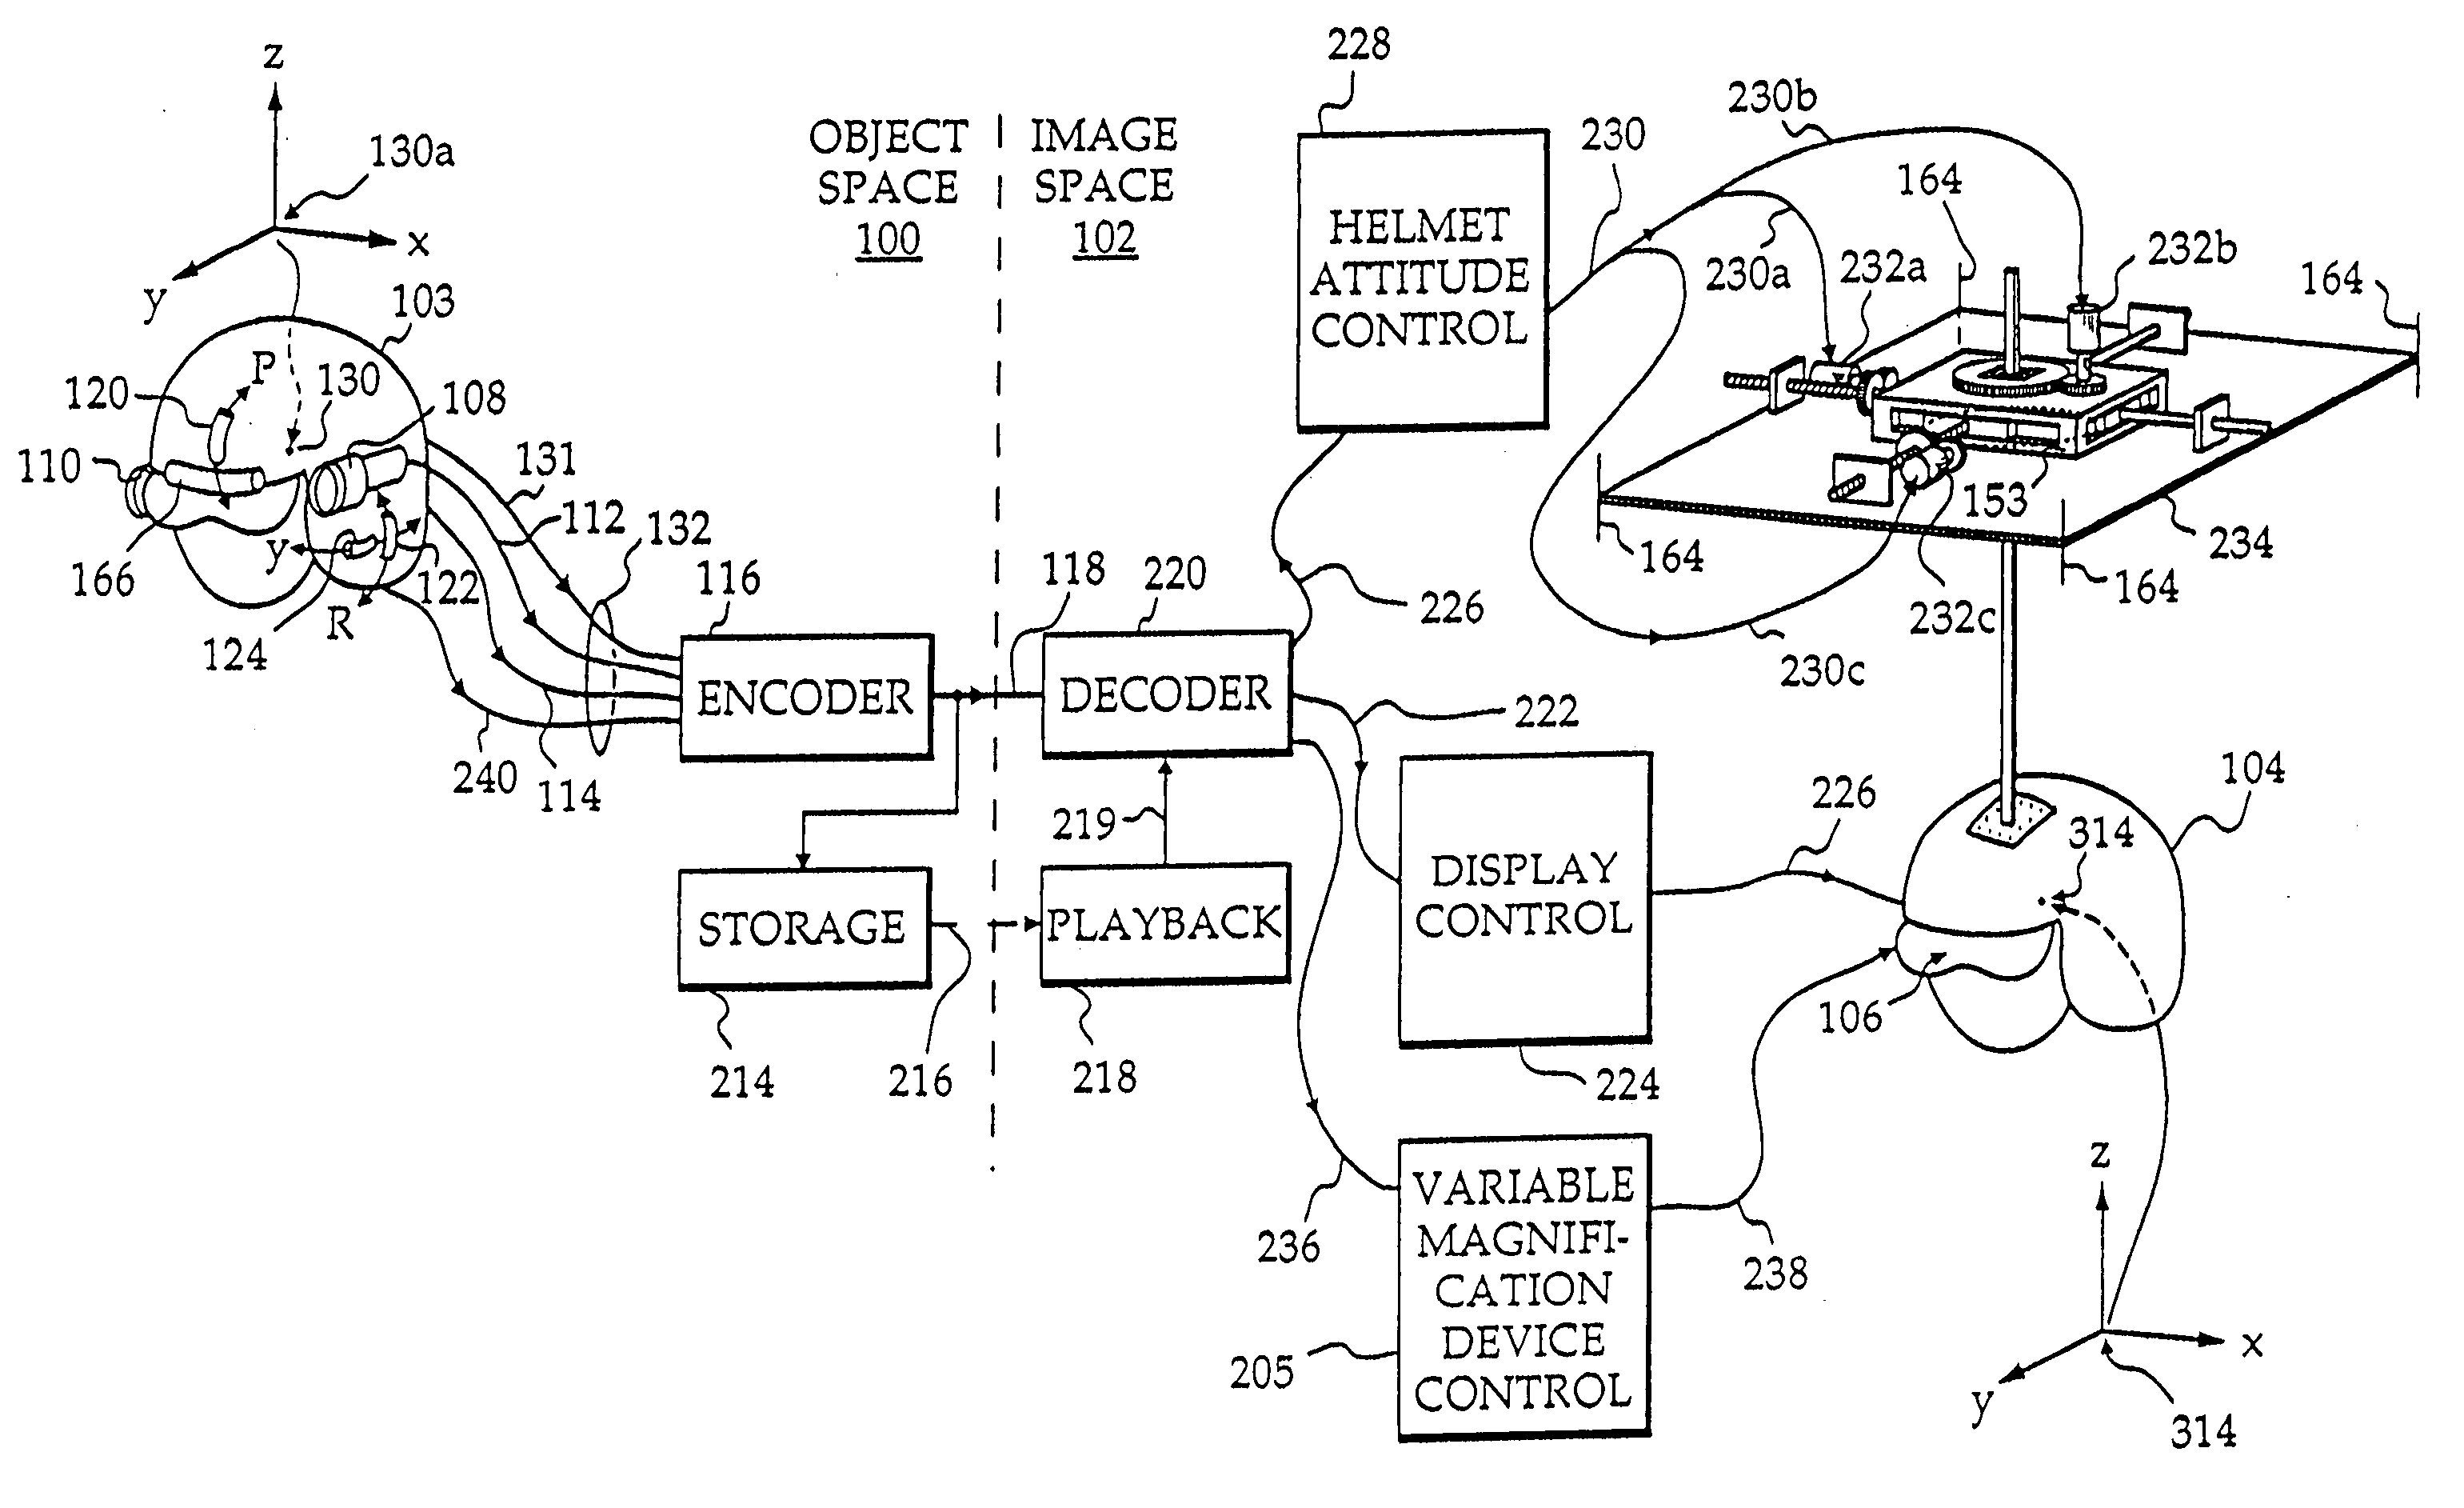 Apparatus for inducing attitudinal head movements for passive virtual reality